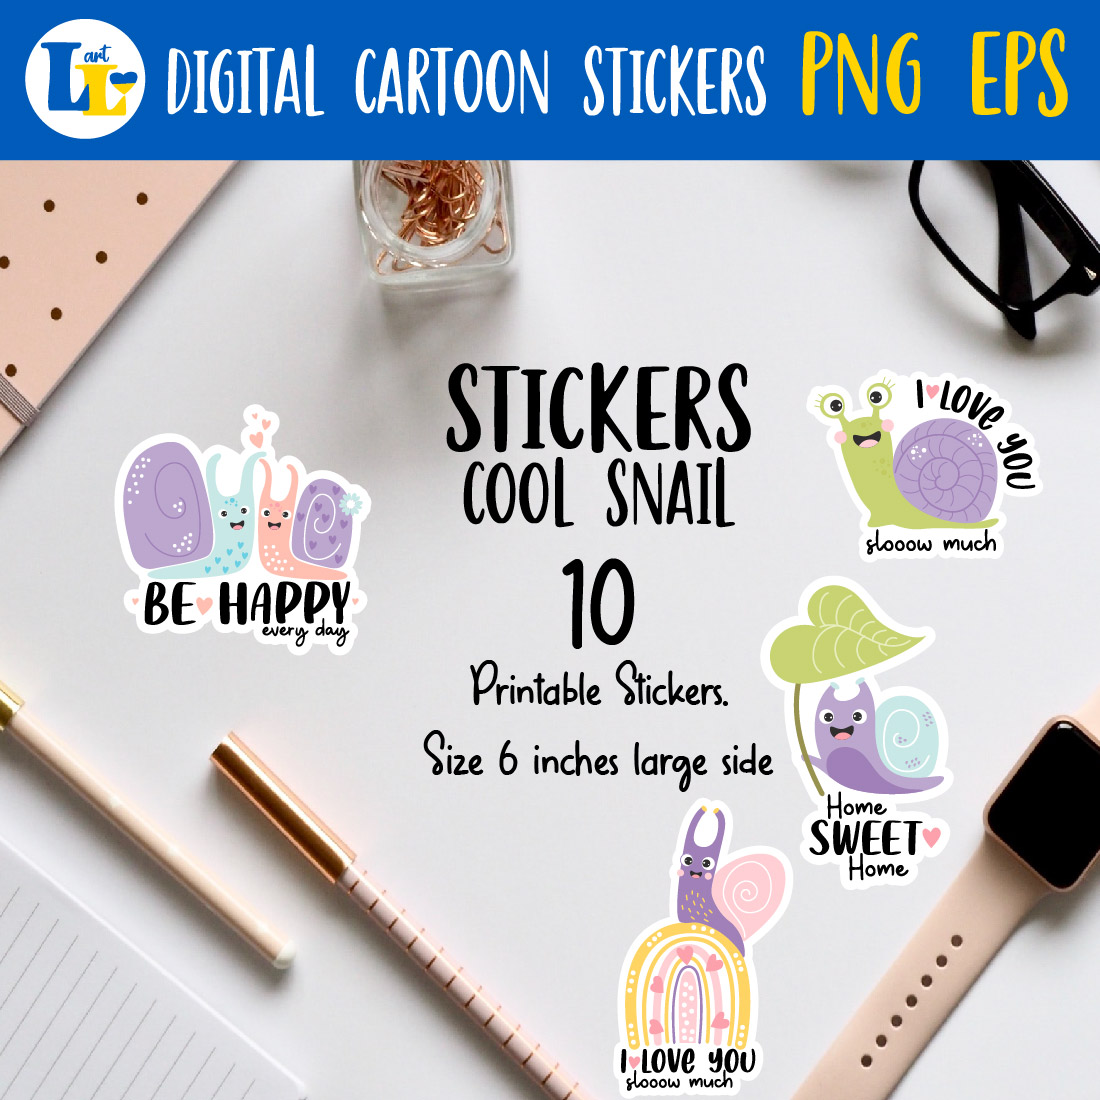 Cute Snails and Slogans Printable Digital Stickers